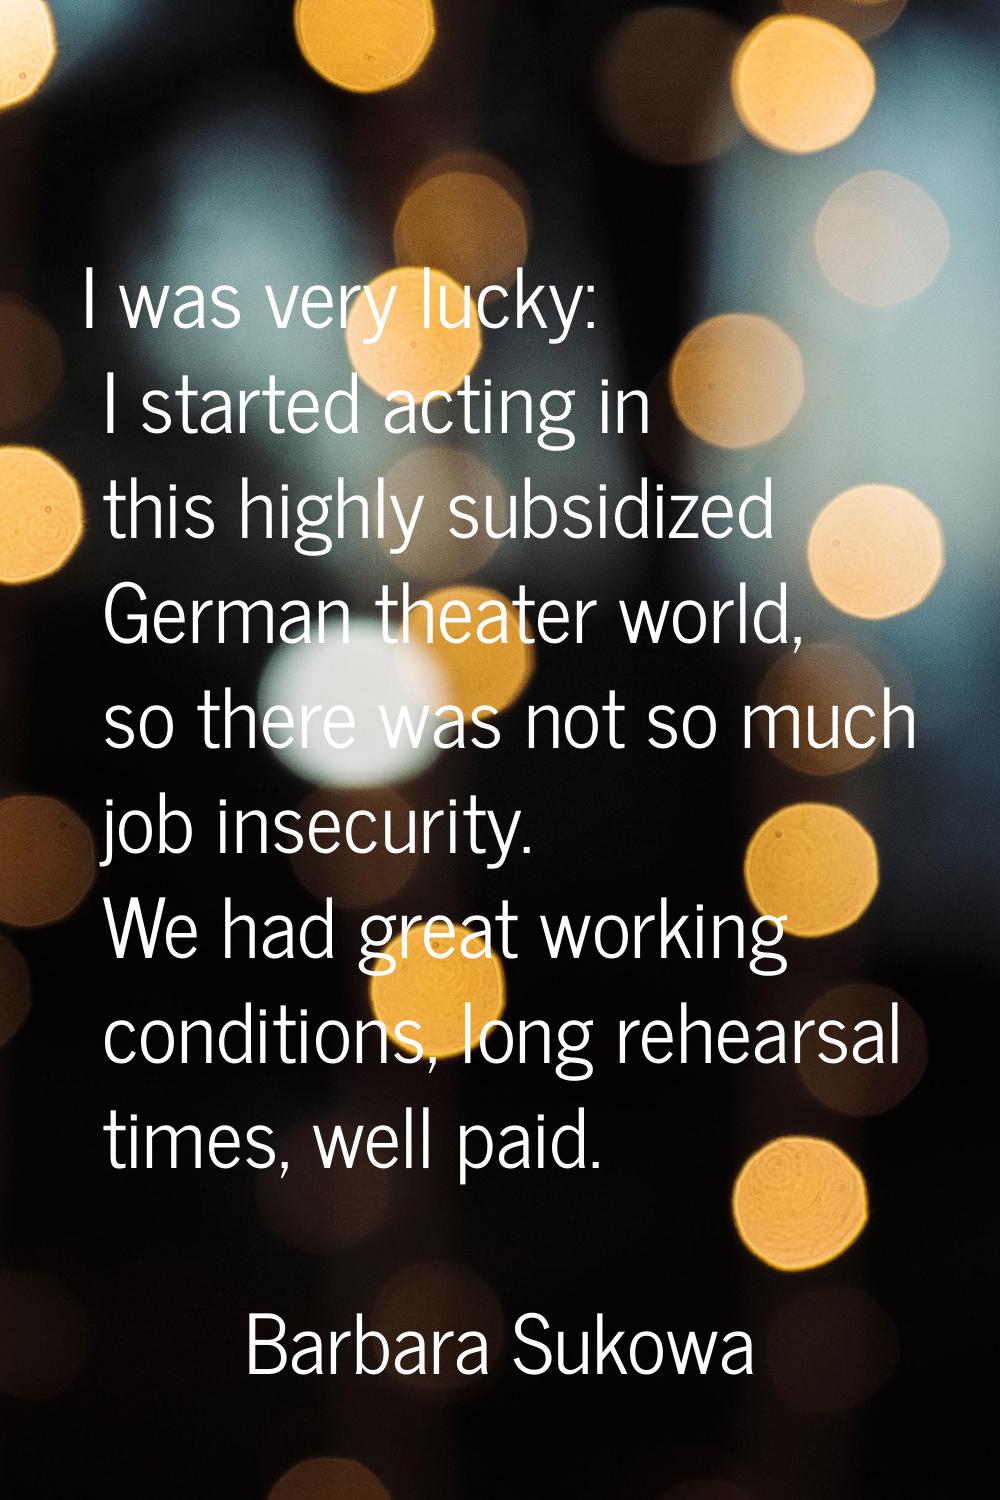 I was very lucky: I started acting in this highly subsidized German theater world, so there was not